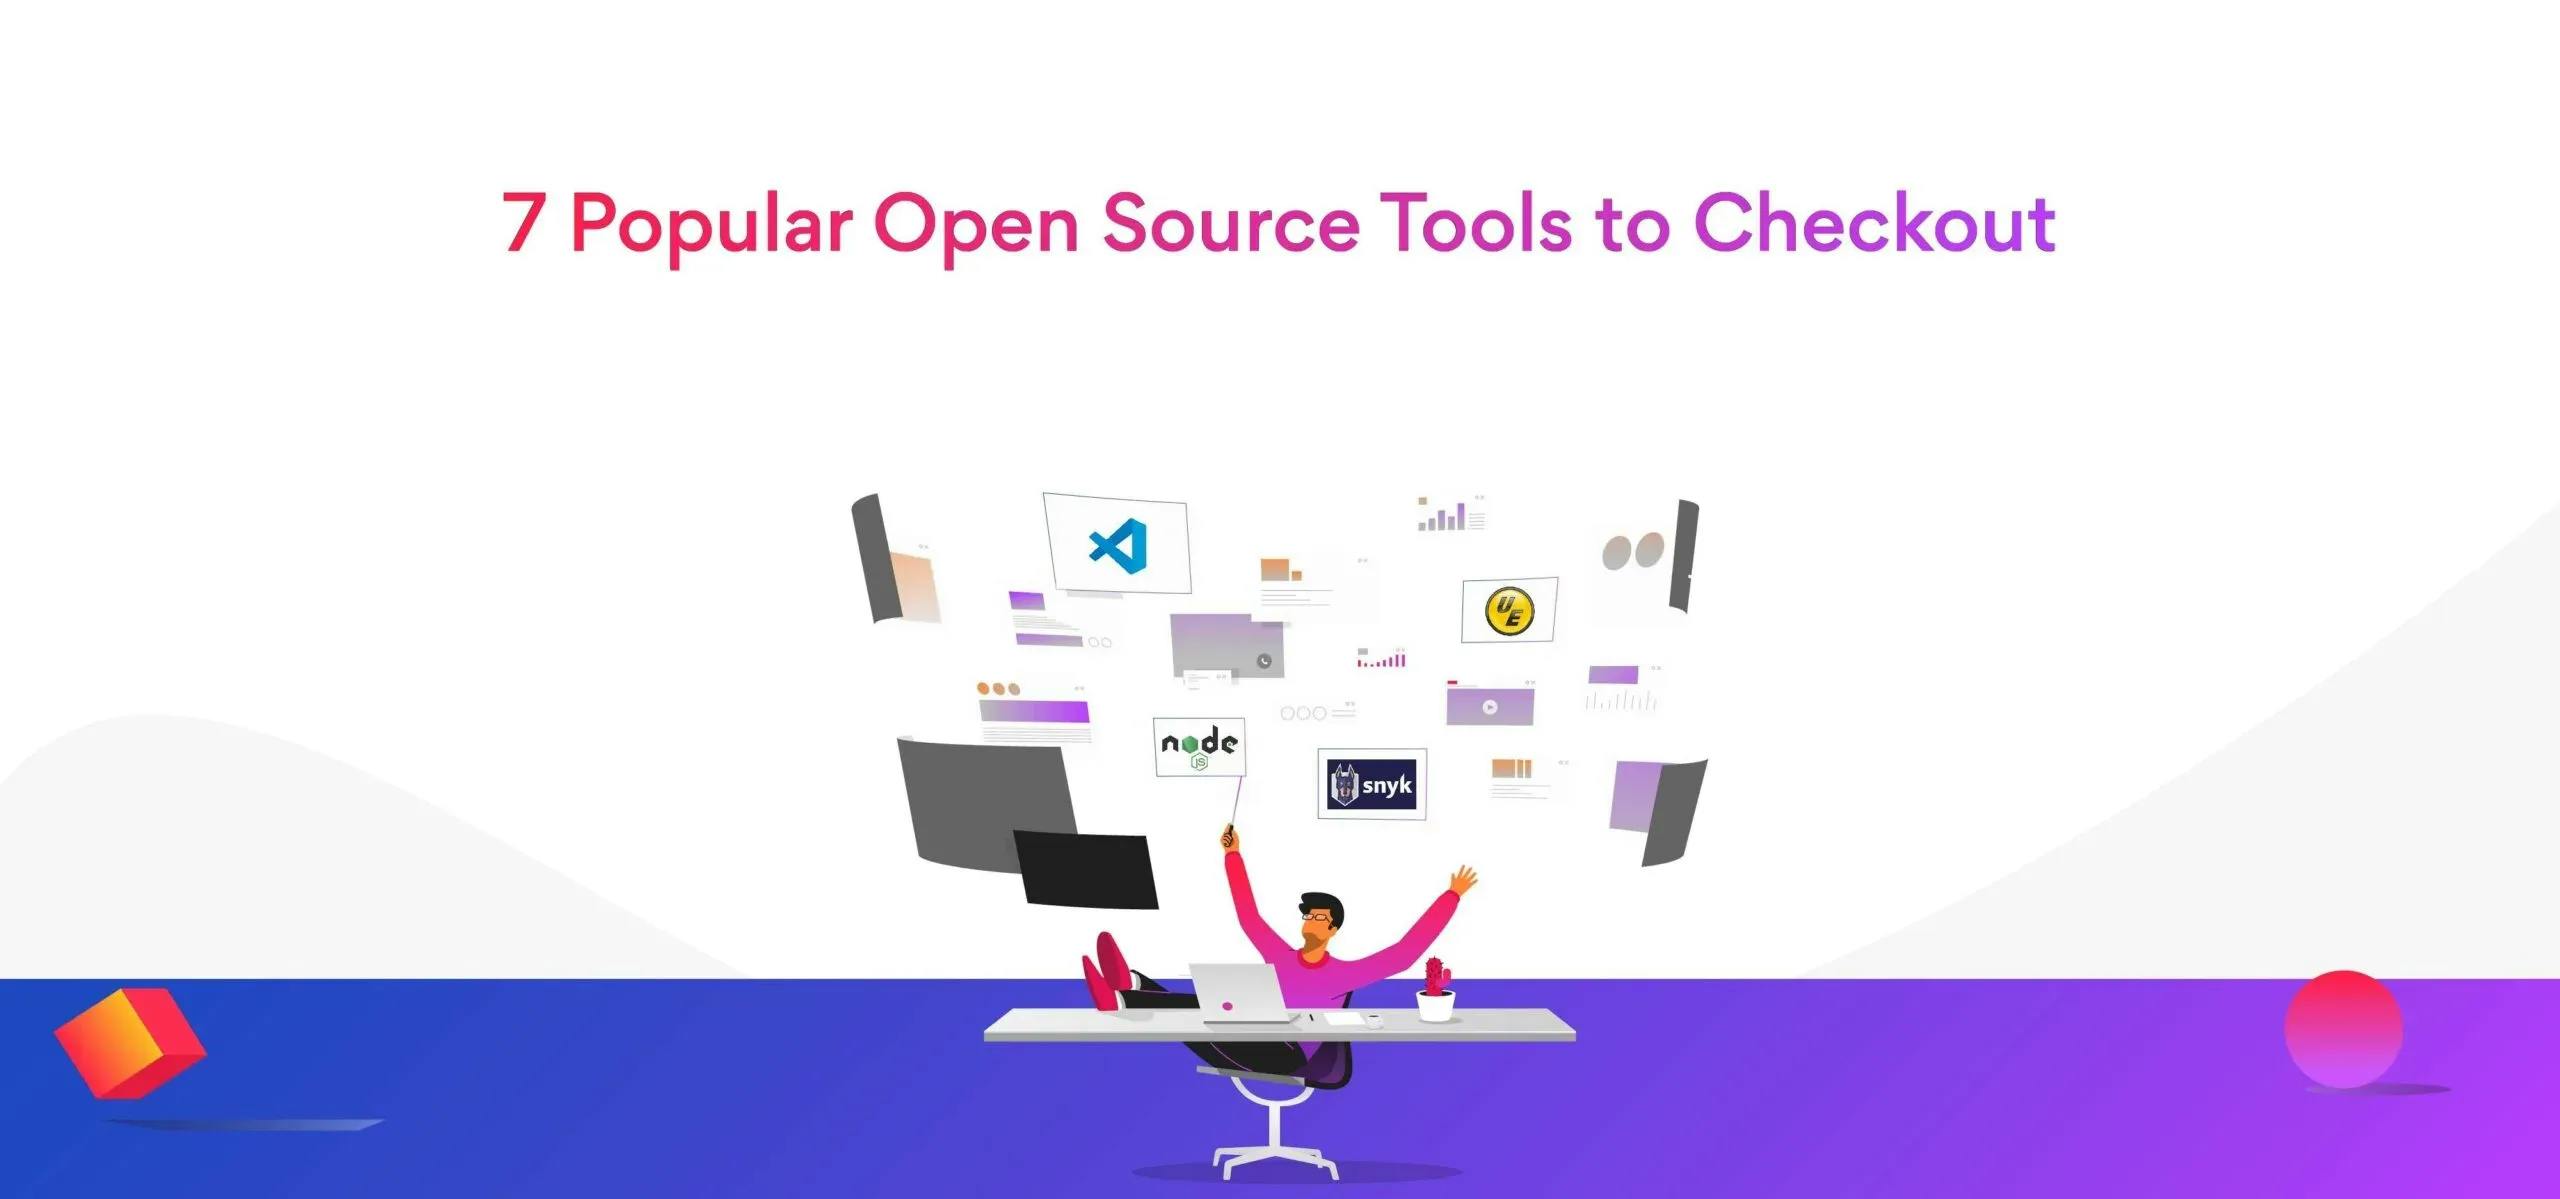 7 Popular Open Source Tools to Checkout